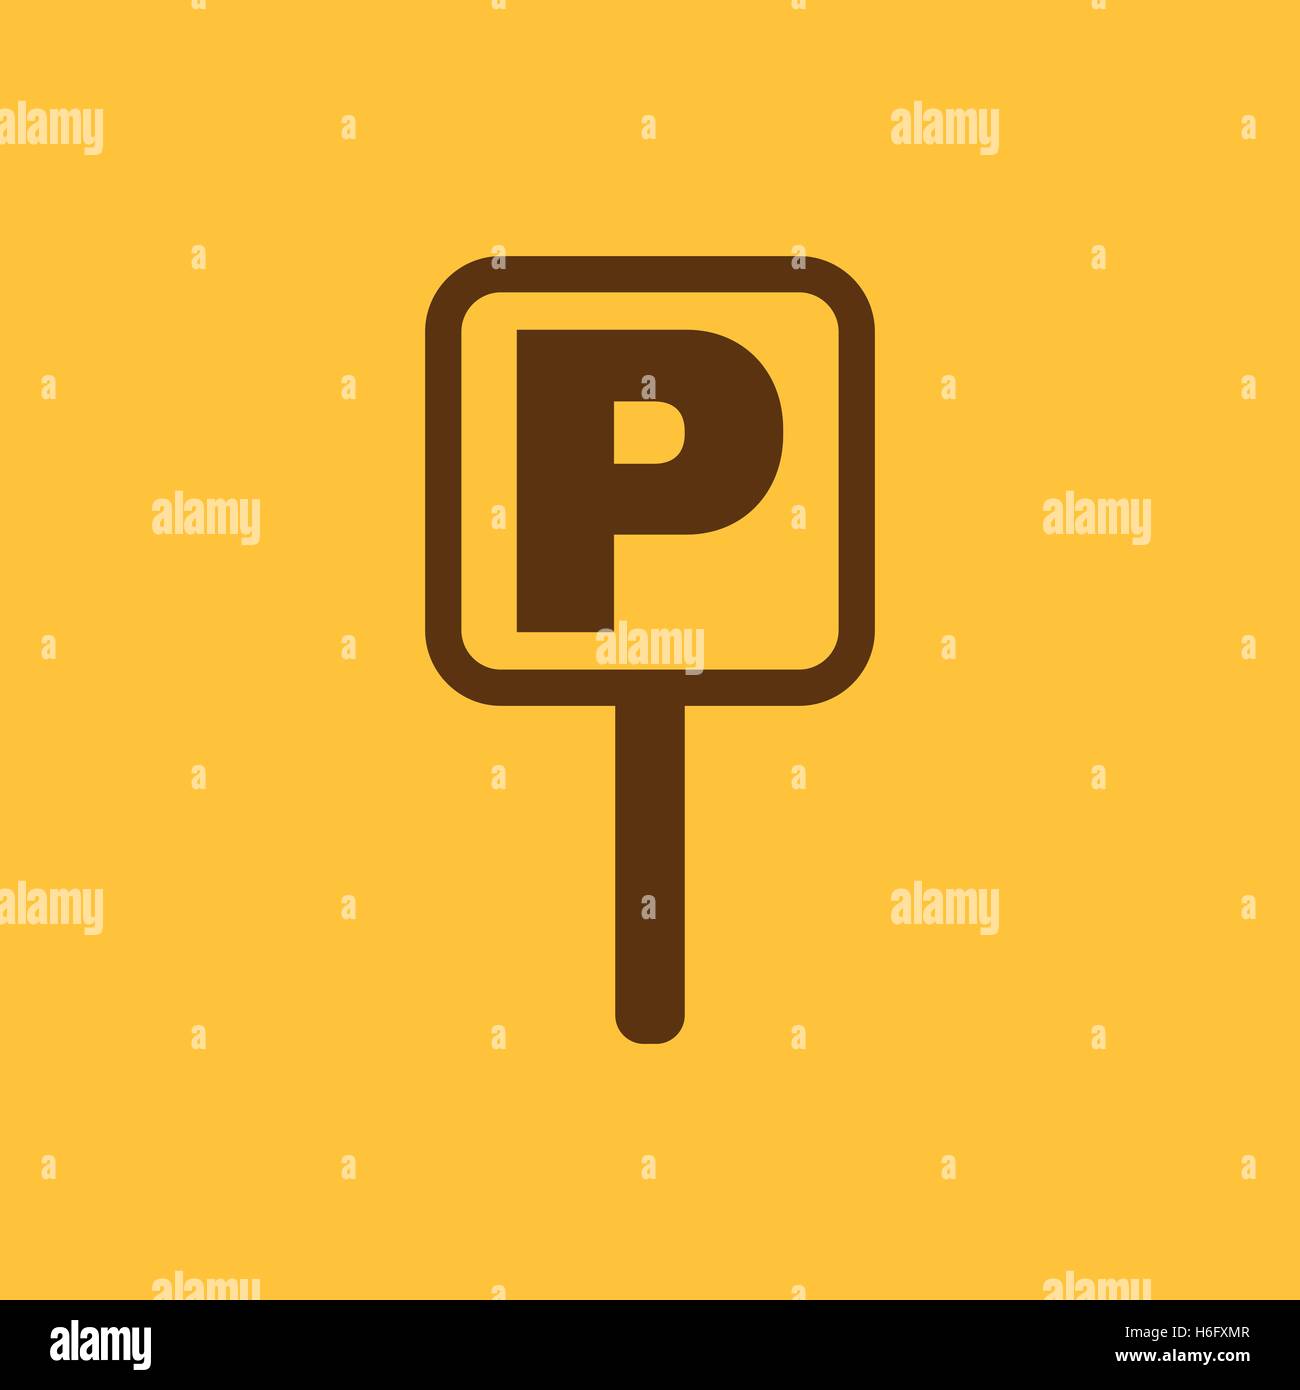 The car parking icon. Parking symbol. Flat Vector illustration Stock